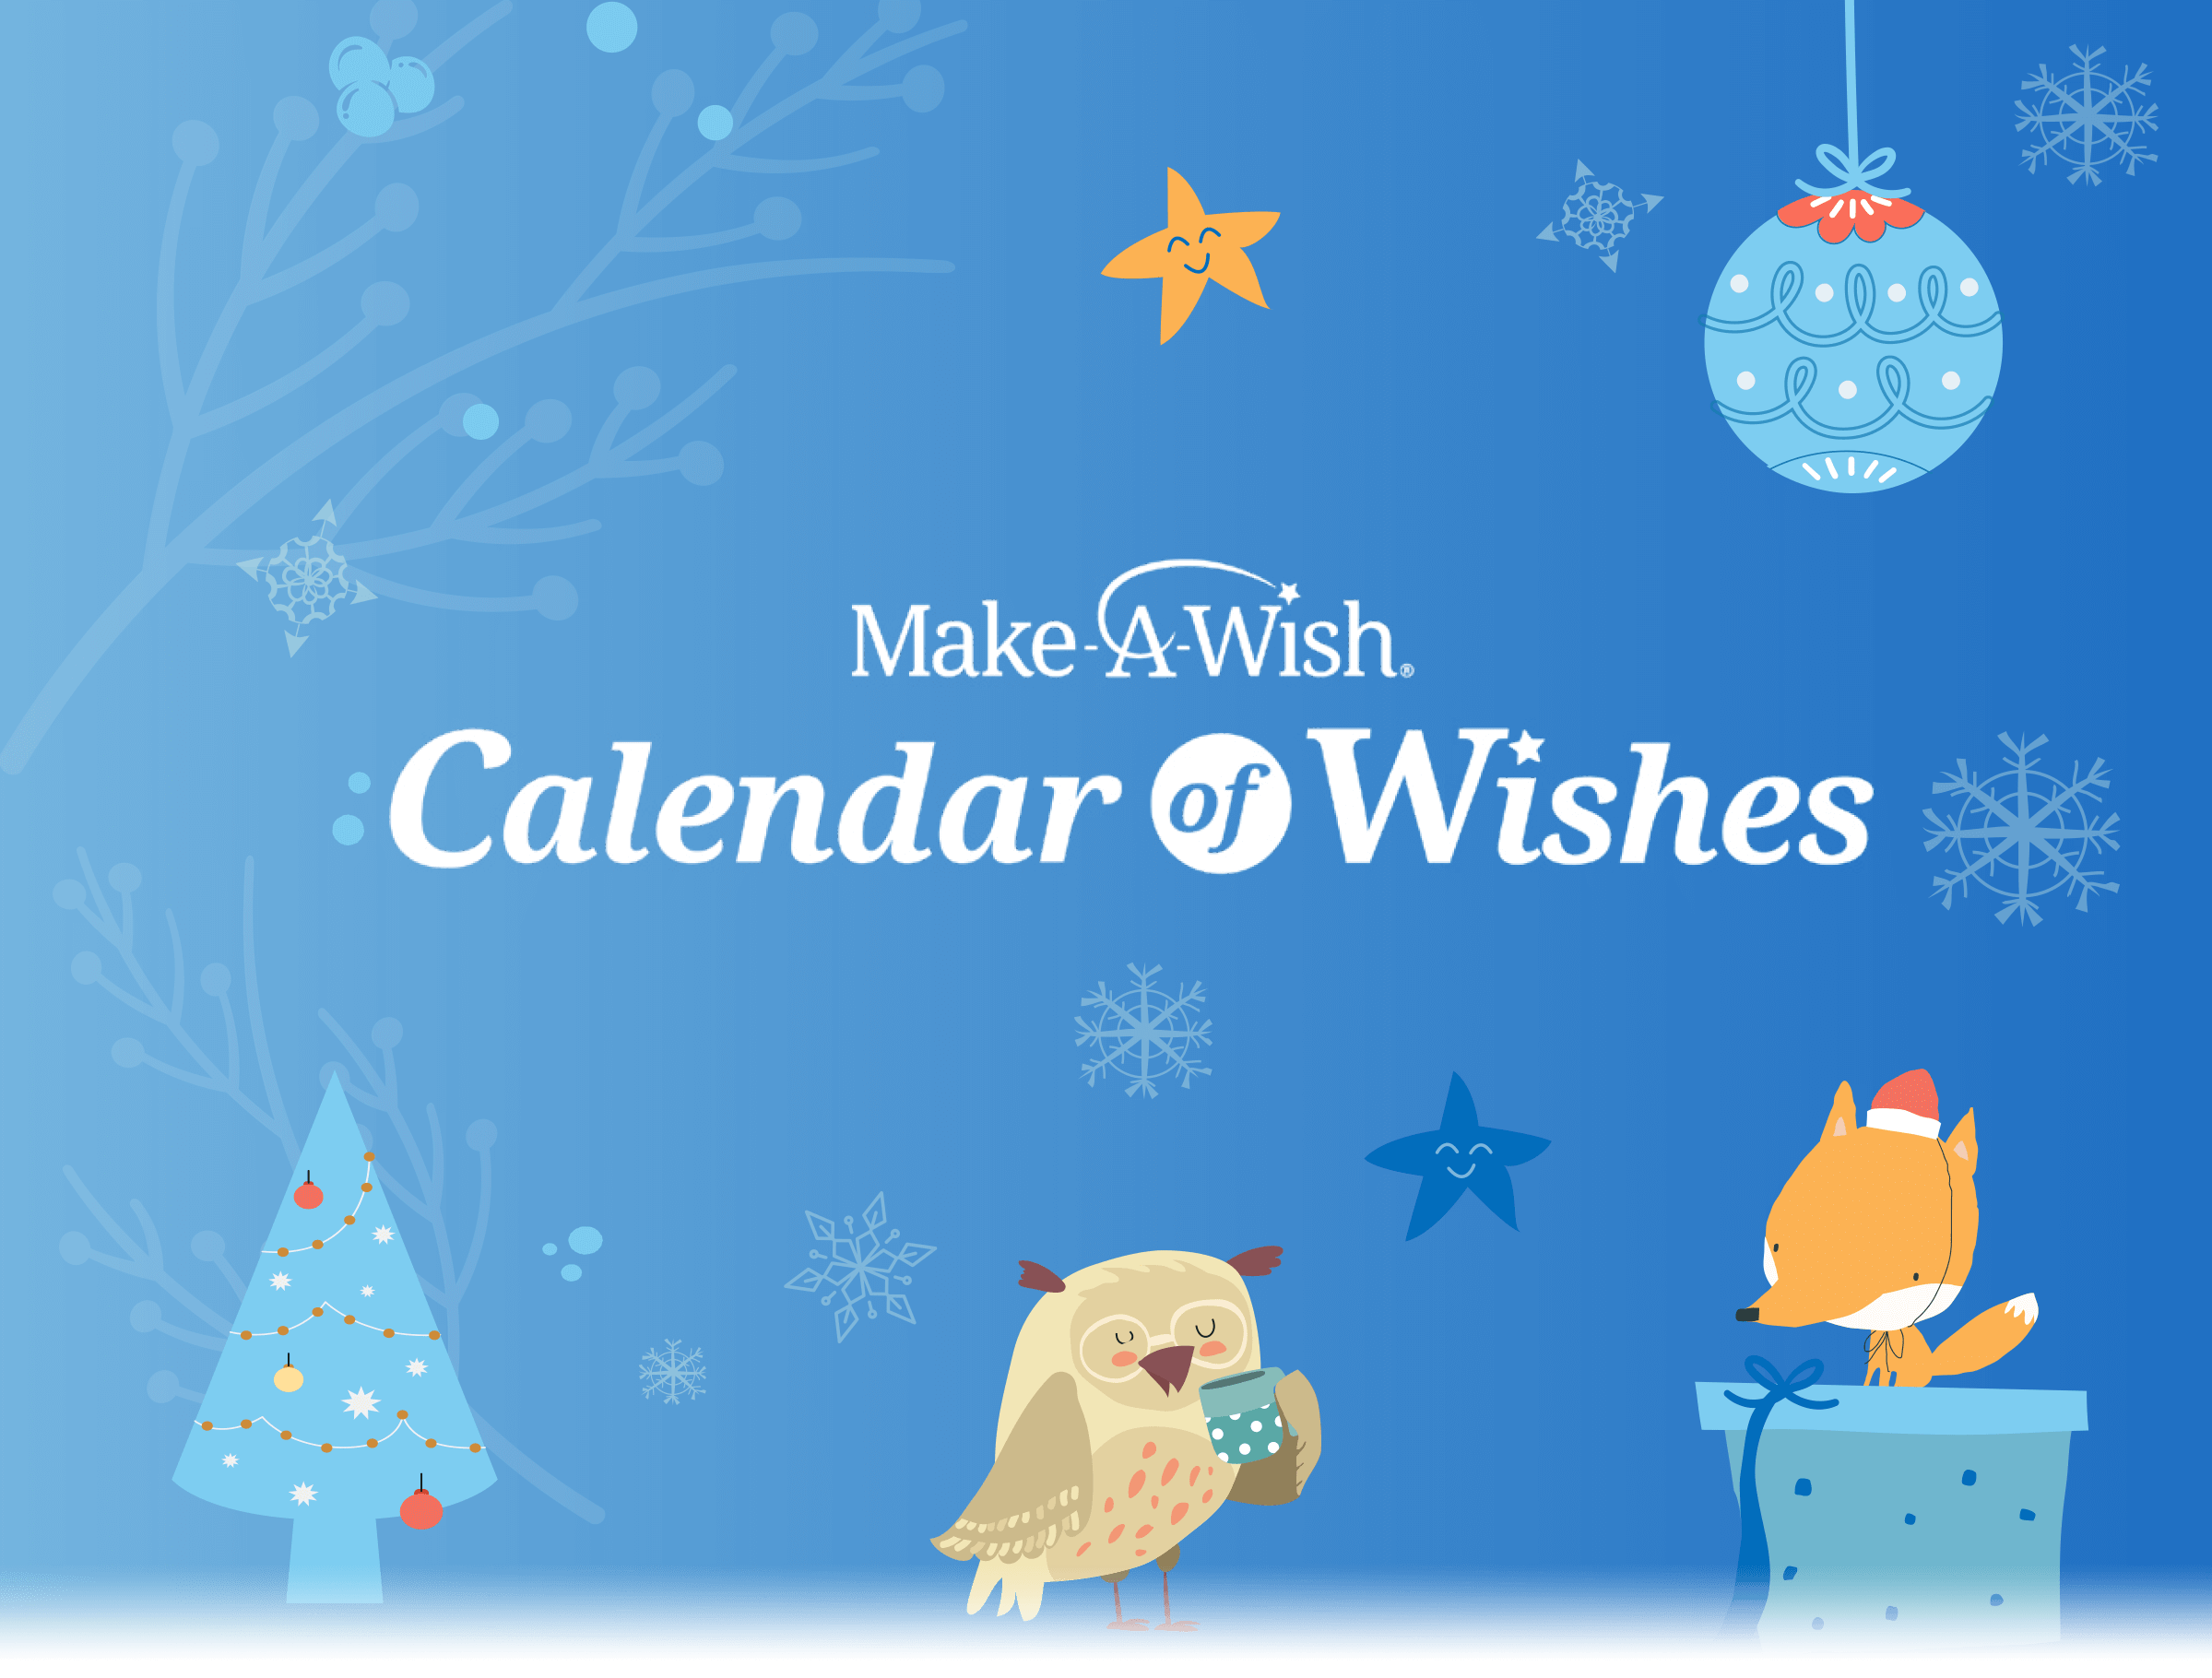 24 days of wishes